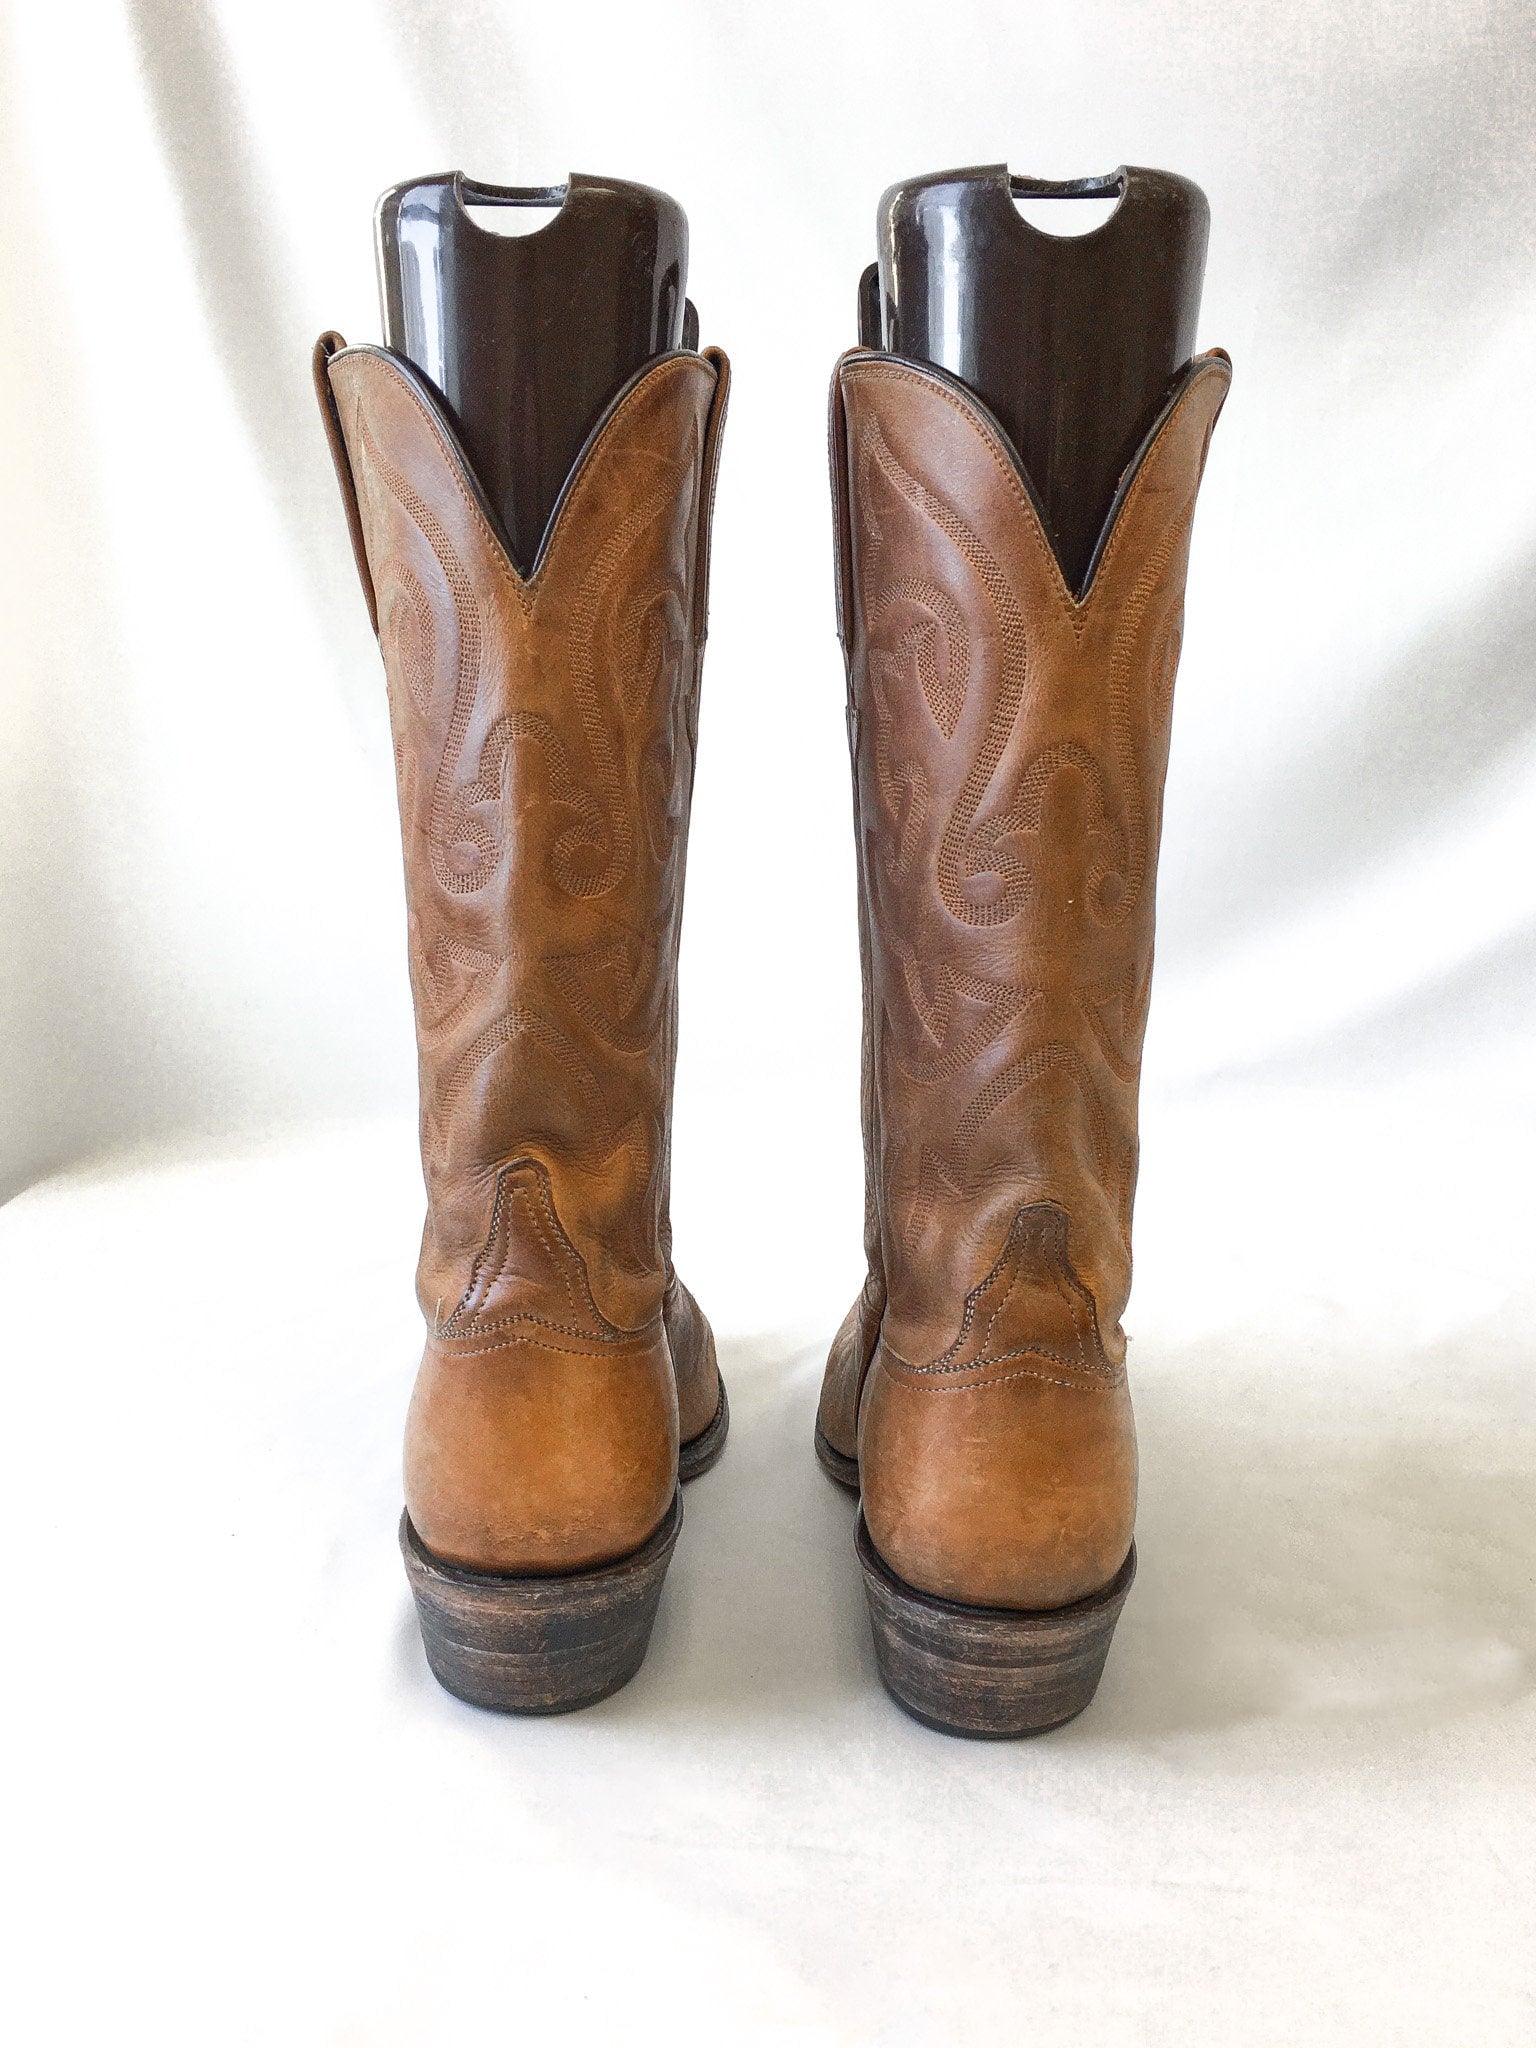 Vintage Lucchese Brown Leather Embroidered Cowboy Boots, Men's Sz. 9.5D, Vintage Lucchese Western Boots